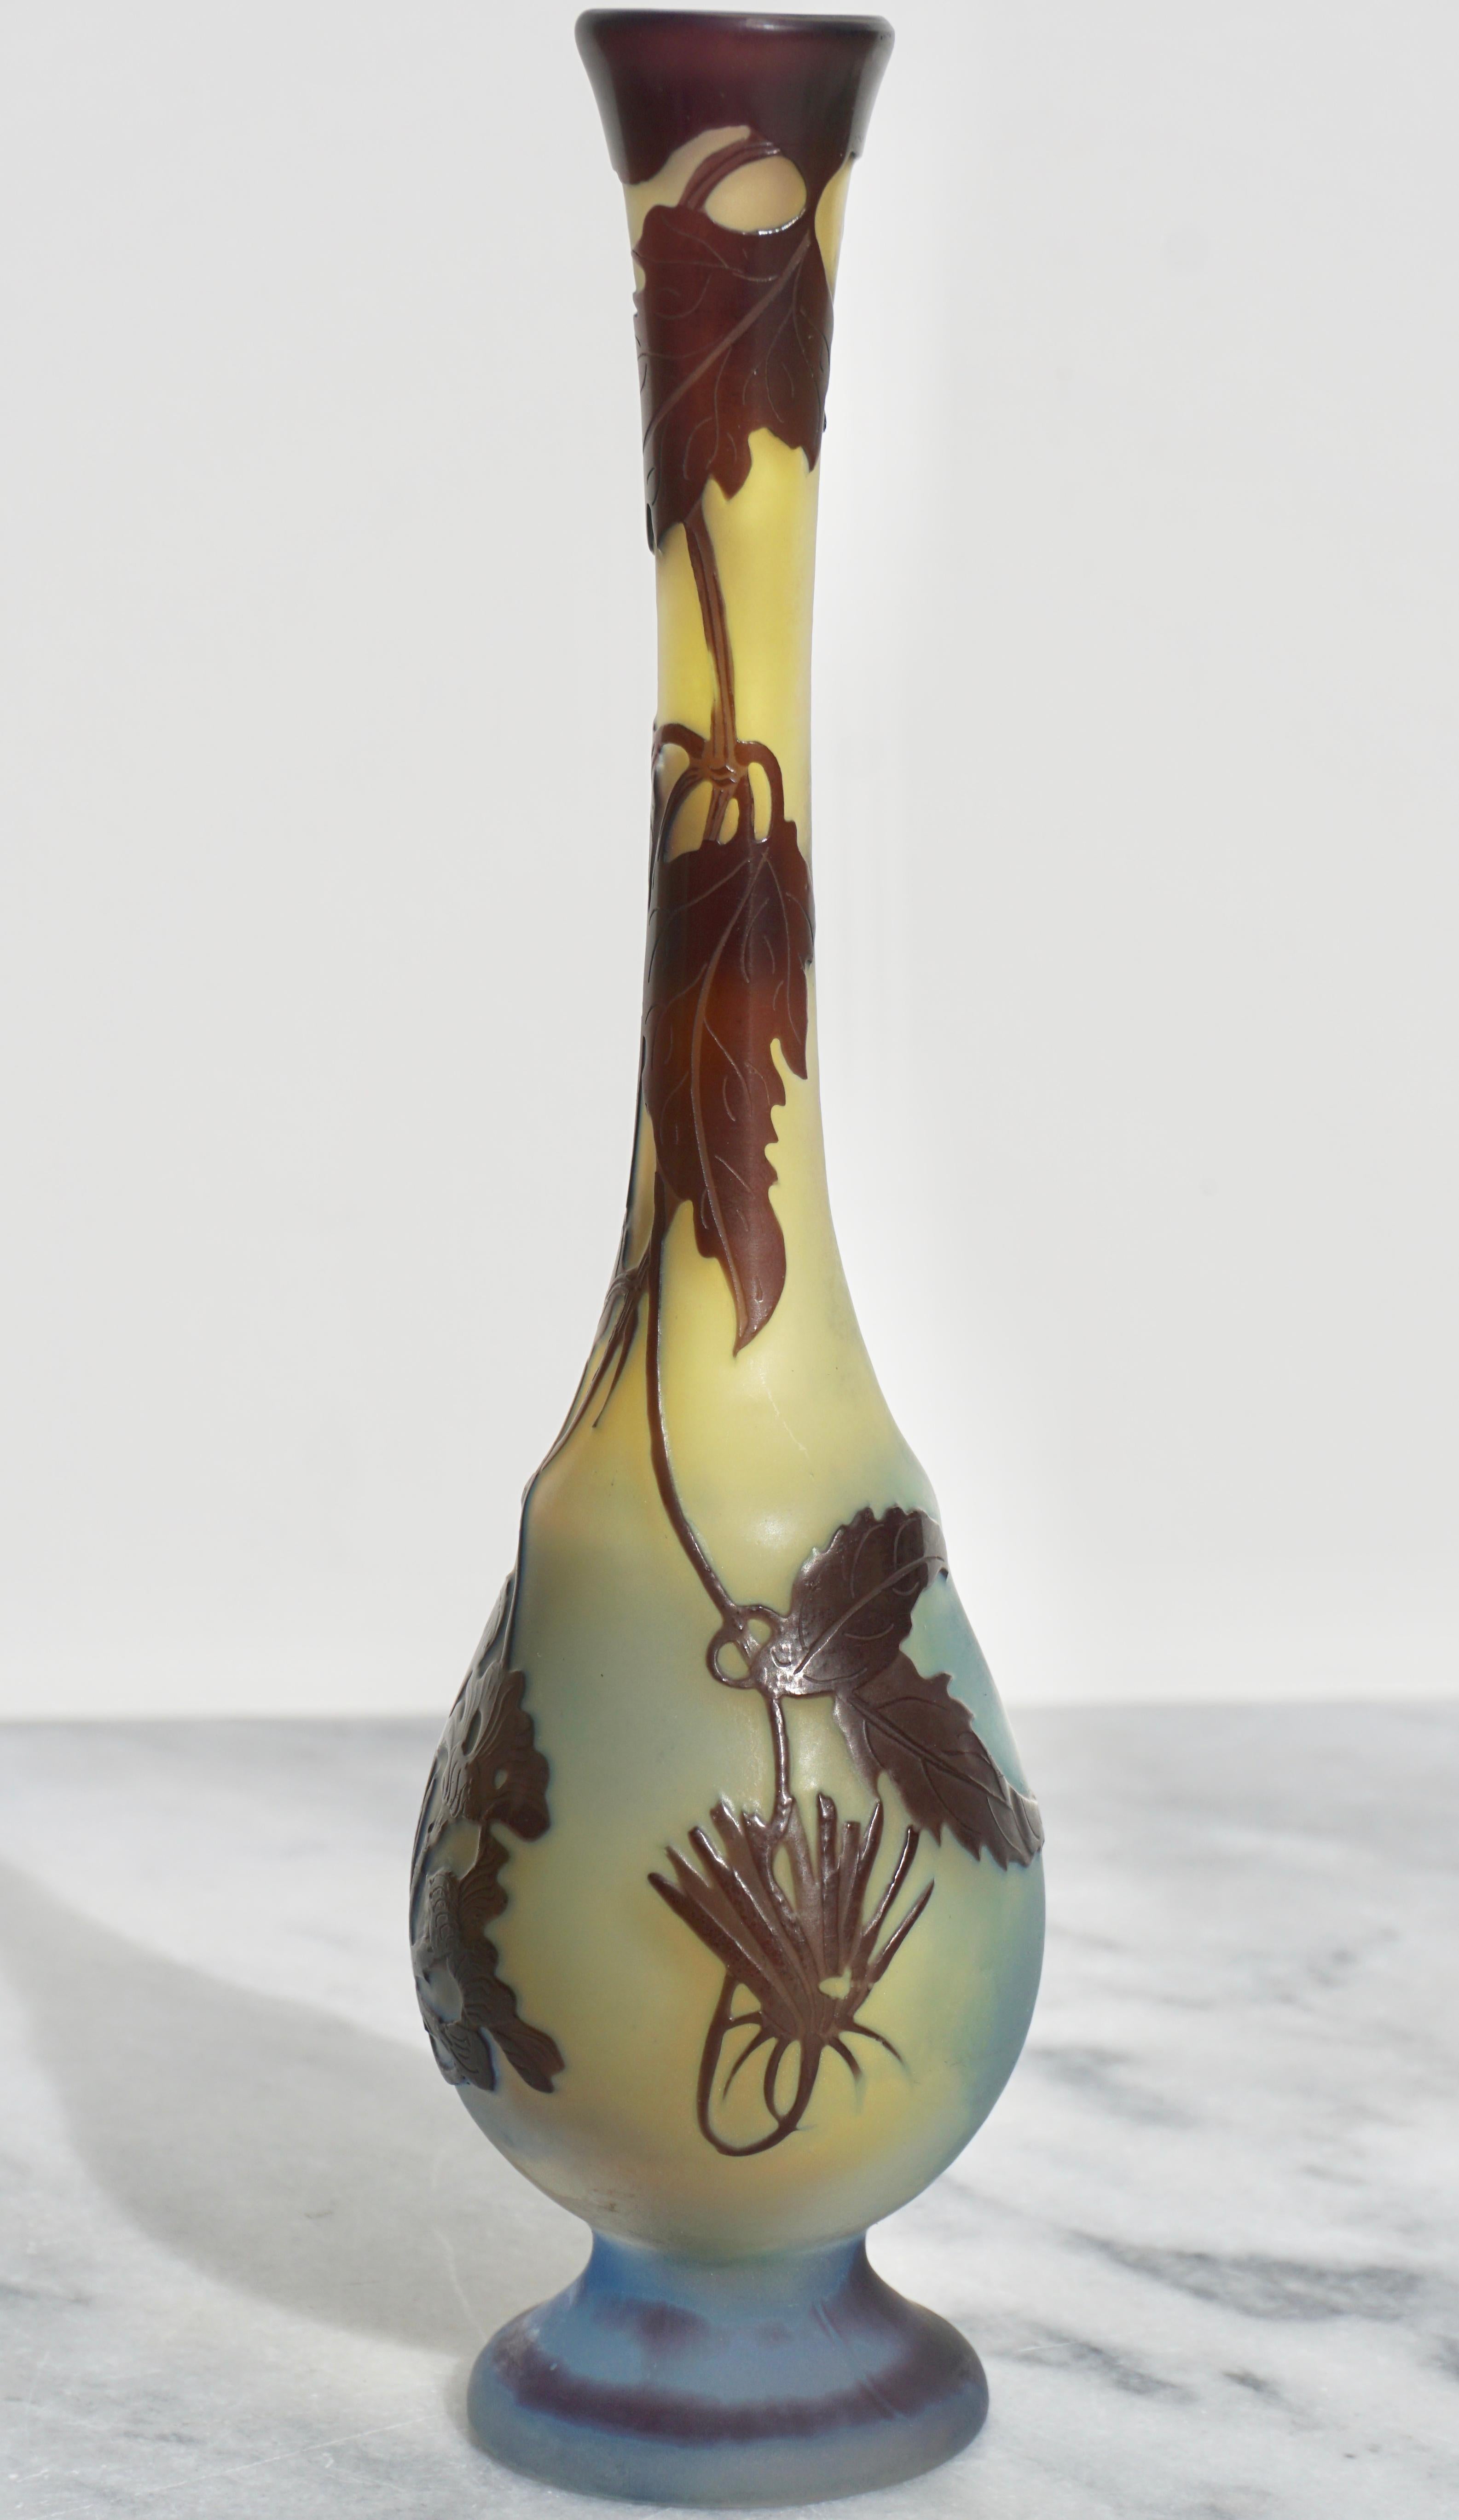 A very pleasing Art Nouveau vase with beautiful form and design. The design is rare and the blue footed base graduating to yellow topside with cameo leaves, vines and flowers make this vase stand out. A respectable 8.75 inches tall with its Art